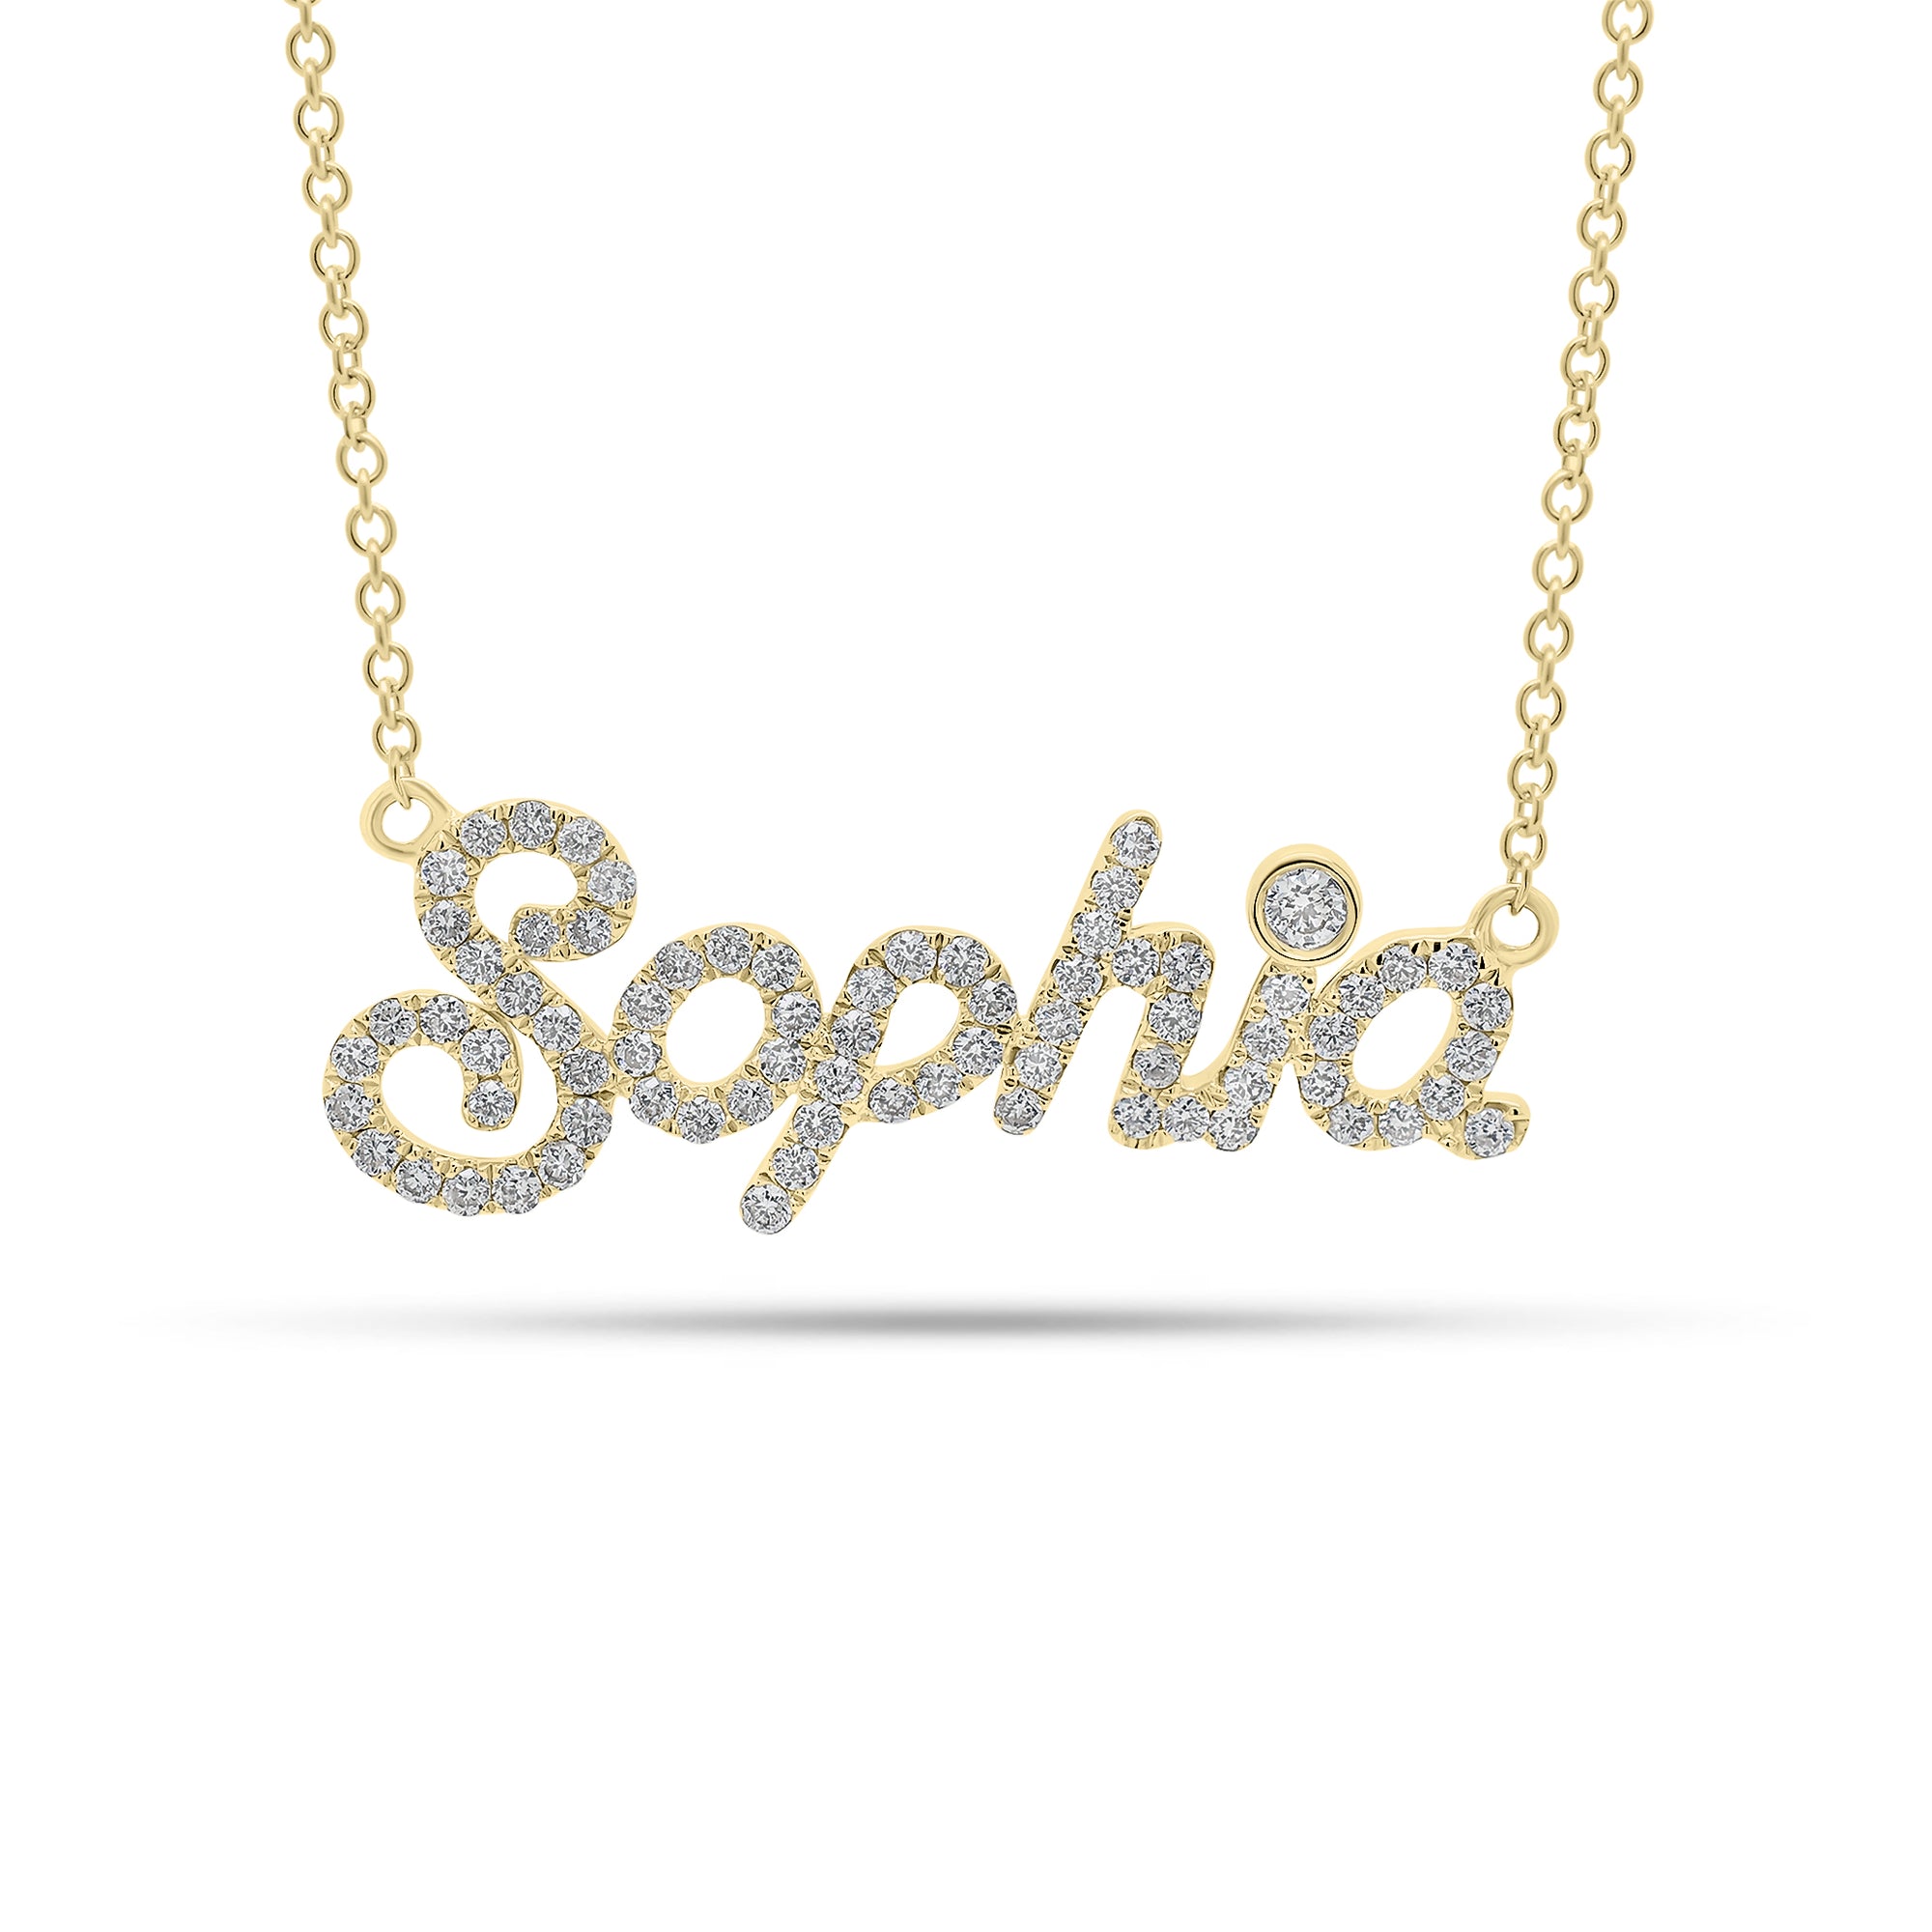 Diamond Nameplate Necklace  - 14K gold weighing 2.51 grams